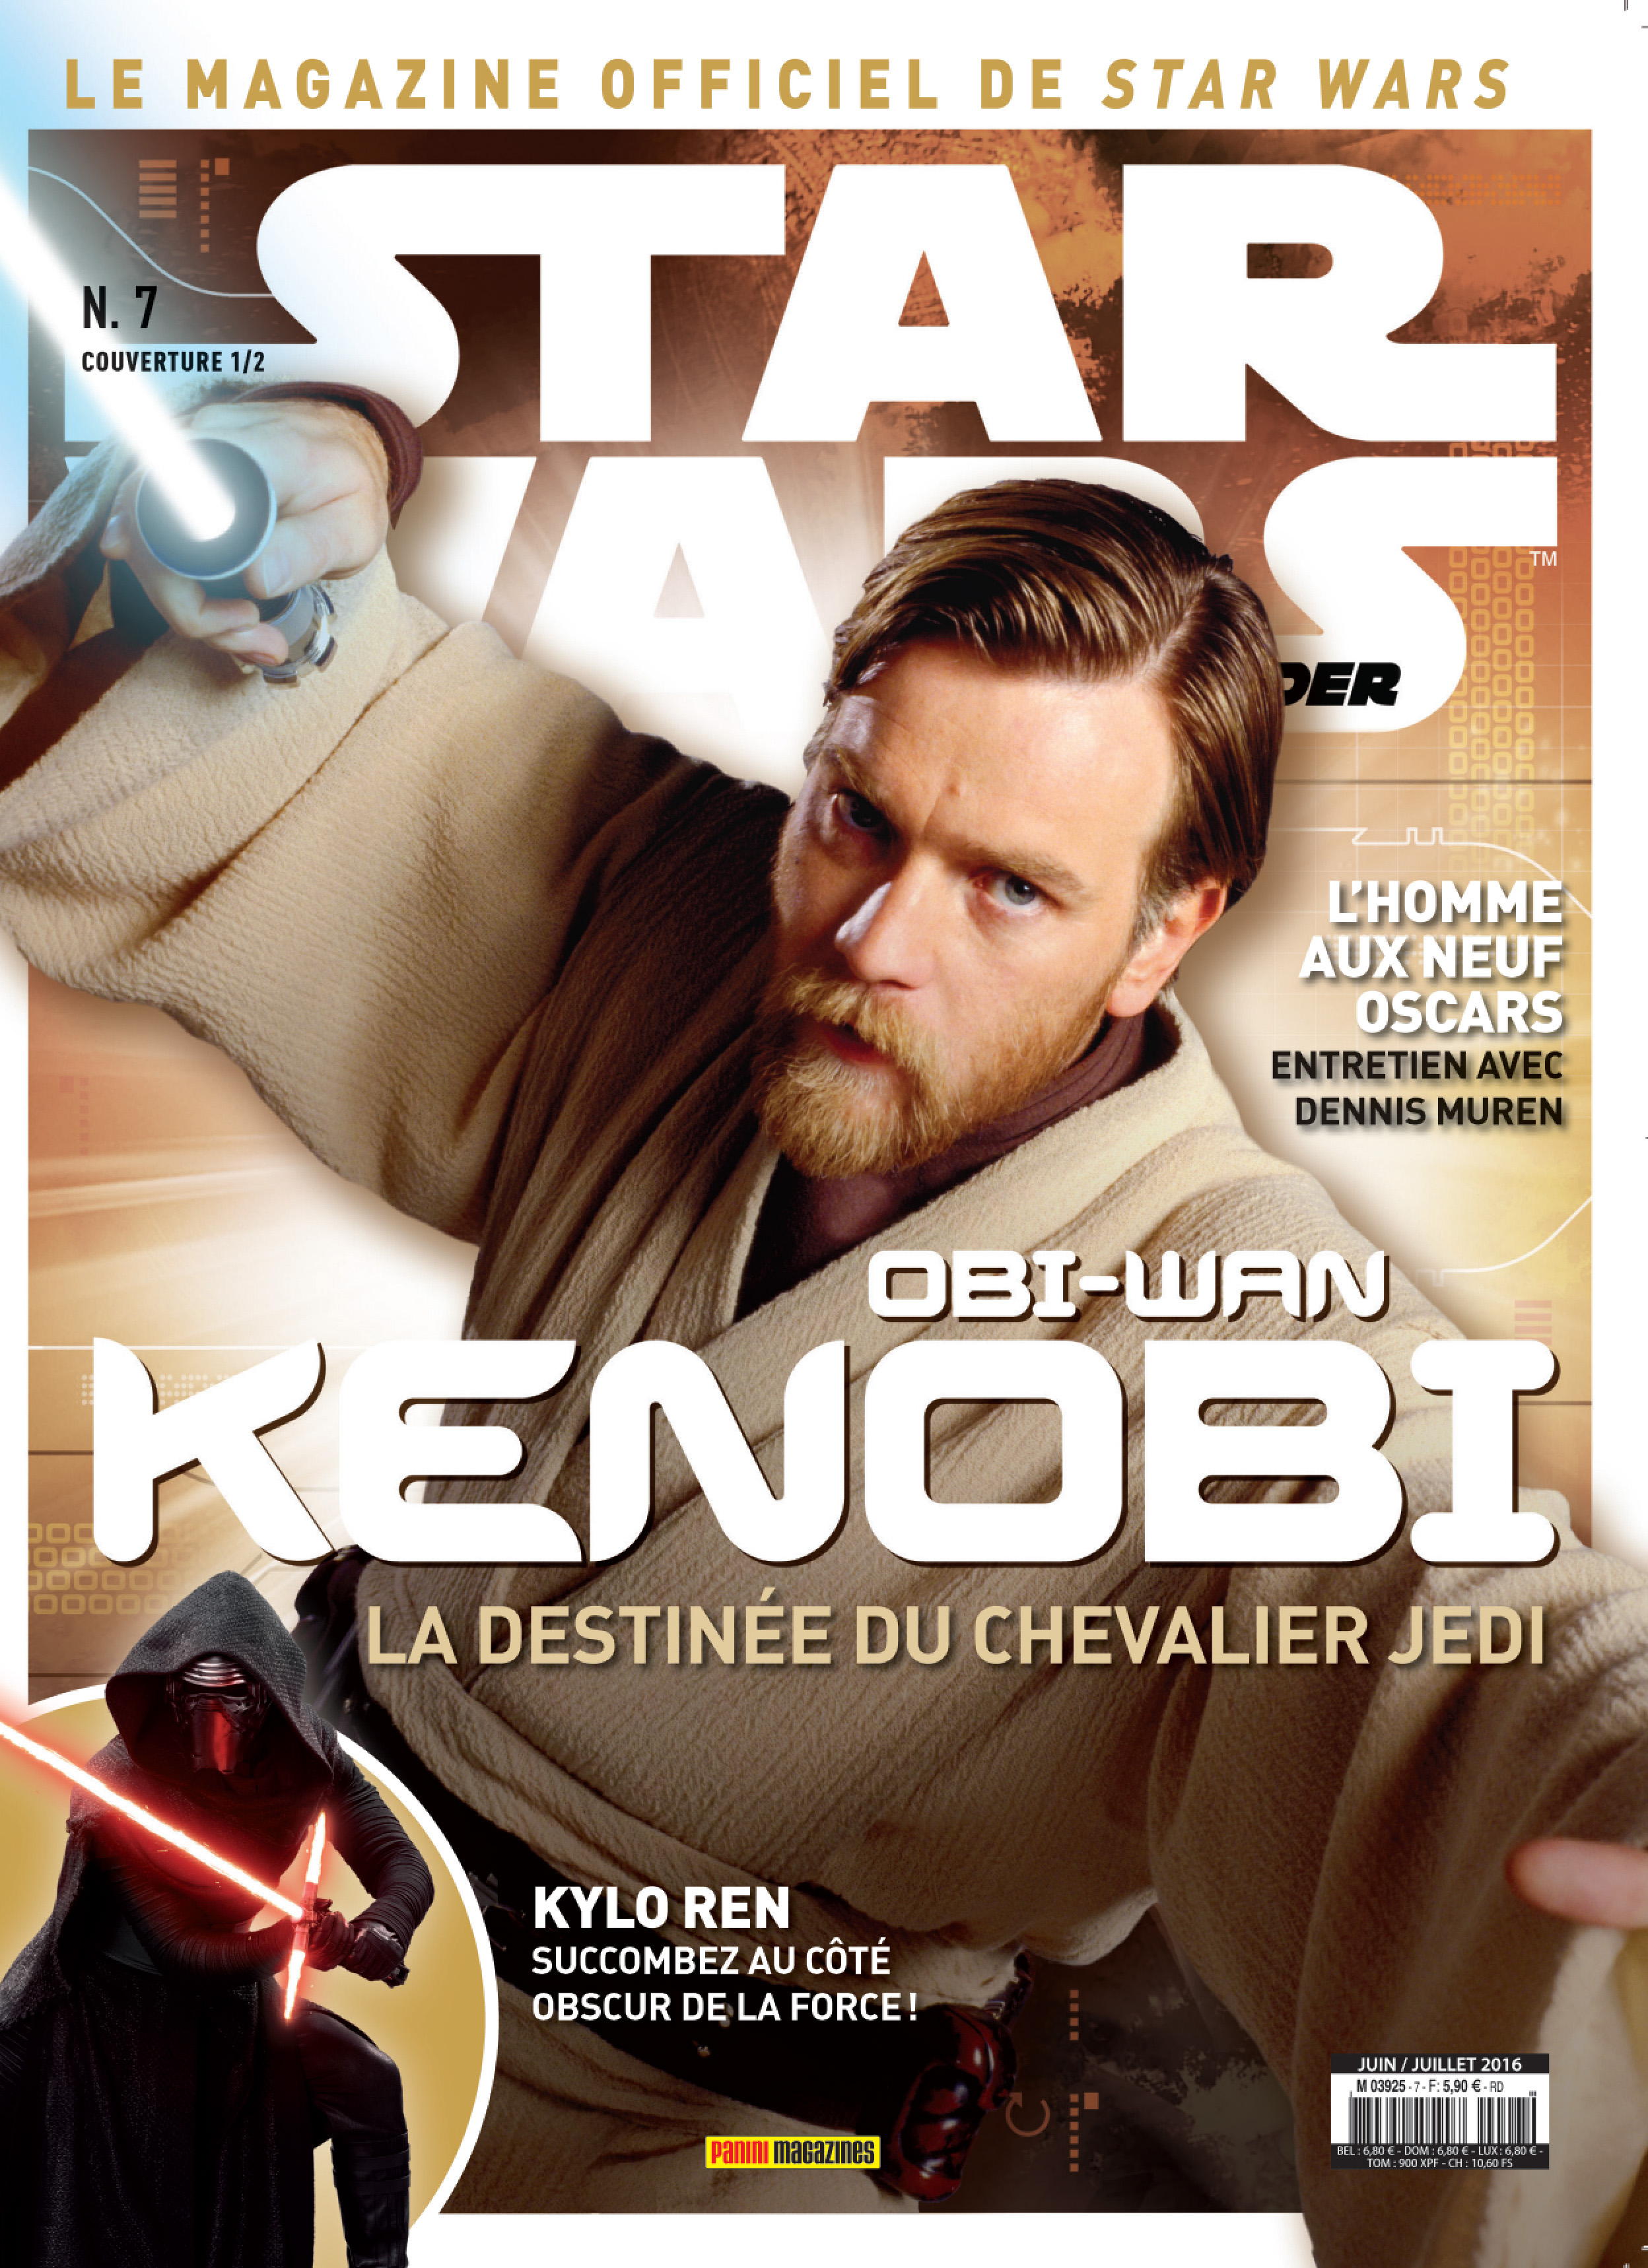 Star Wars Insider 6 - Couverture A